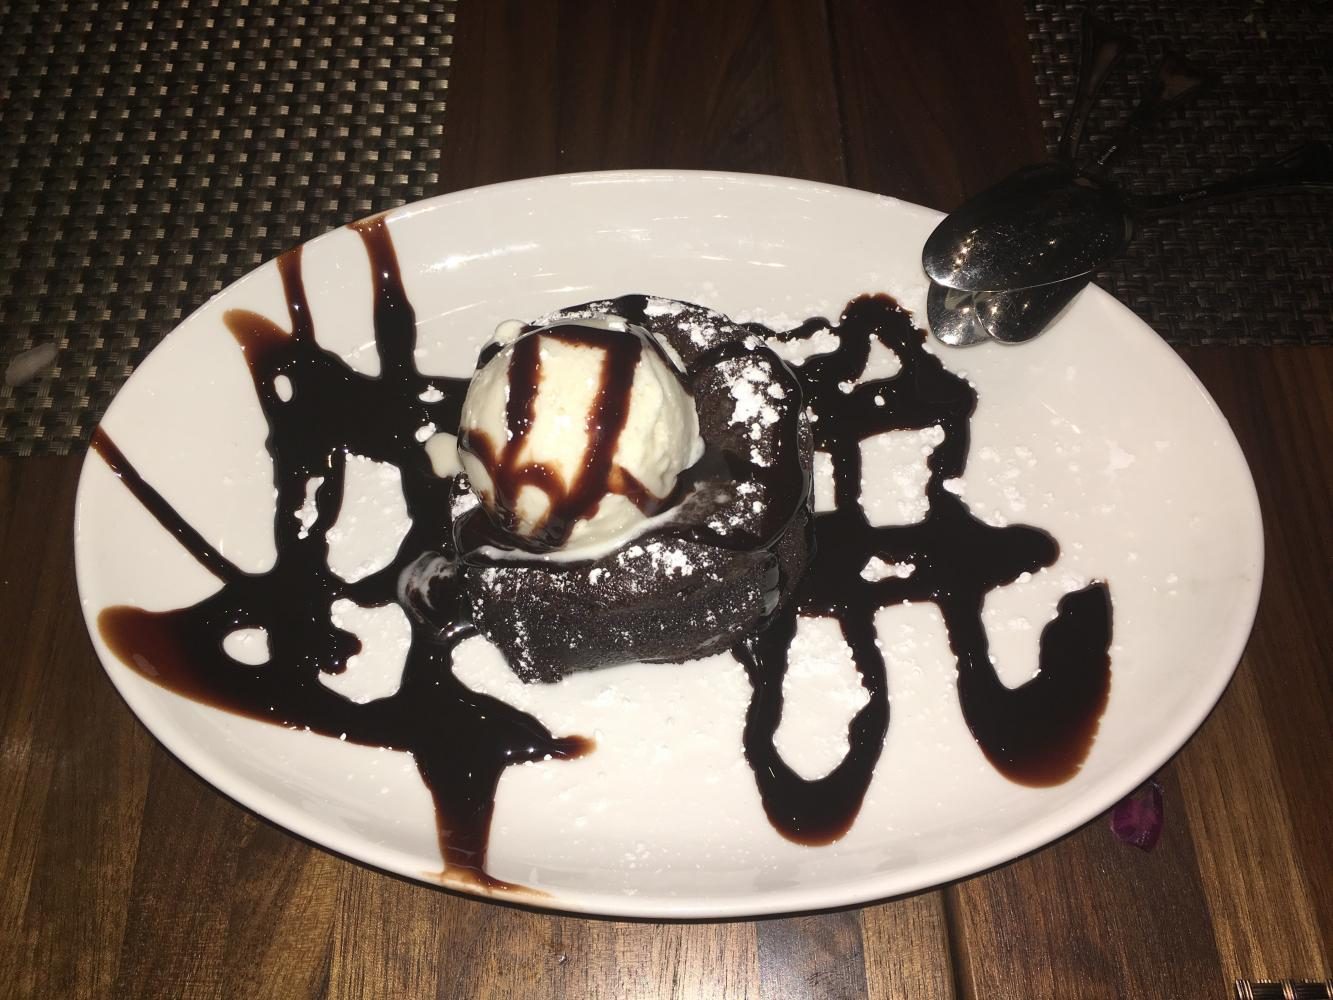 The Chocolate Lava Cake is served with ice cream and covered in fudge sauce. Although it has an enticing appearance, the dish is not the meals highlight. 